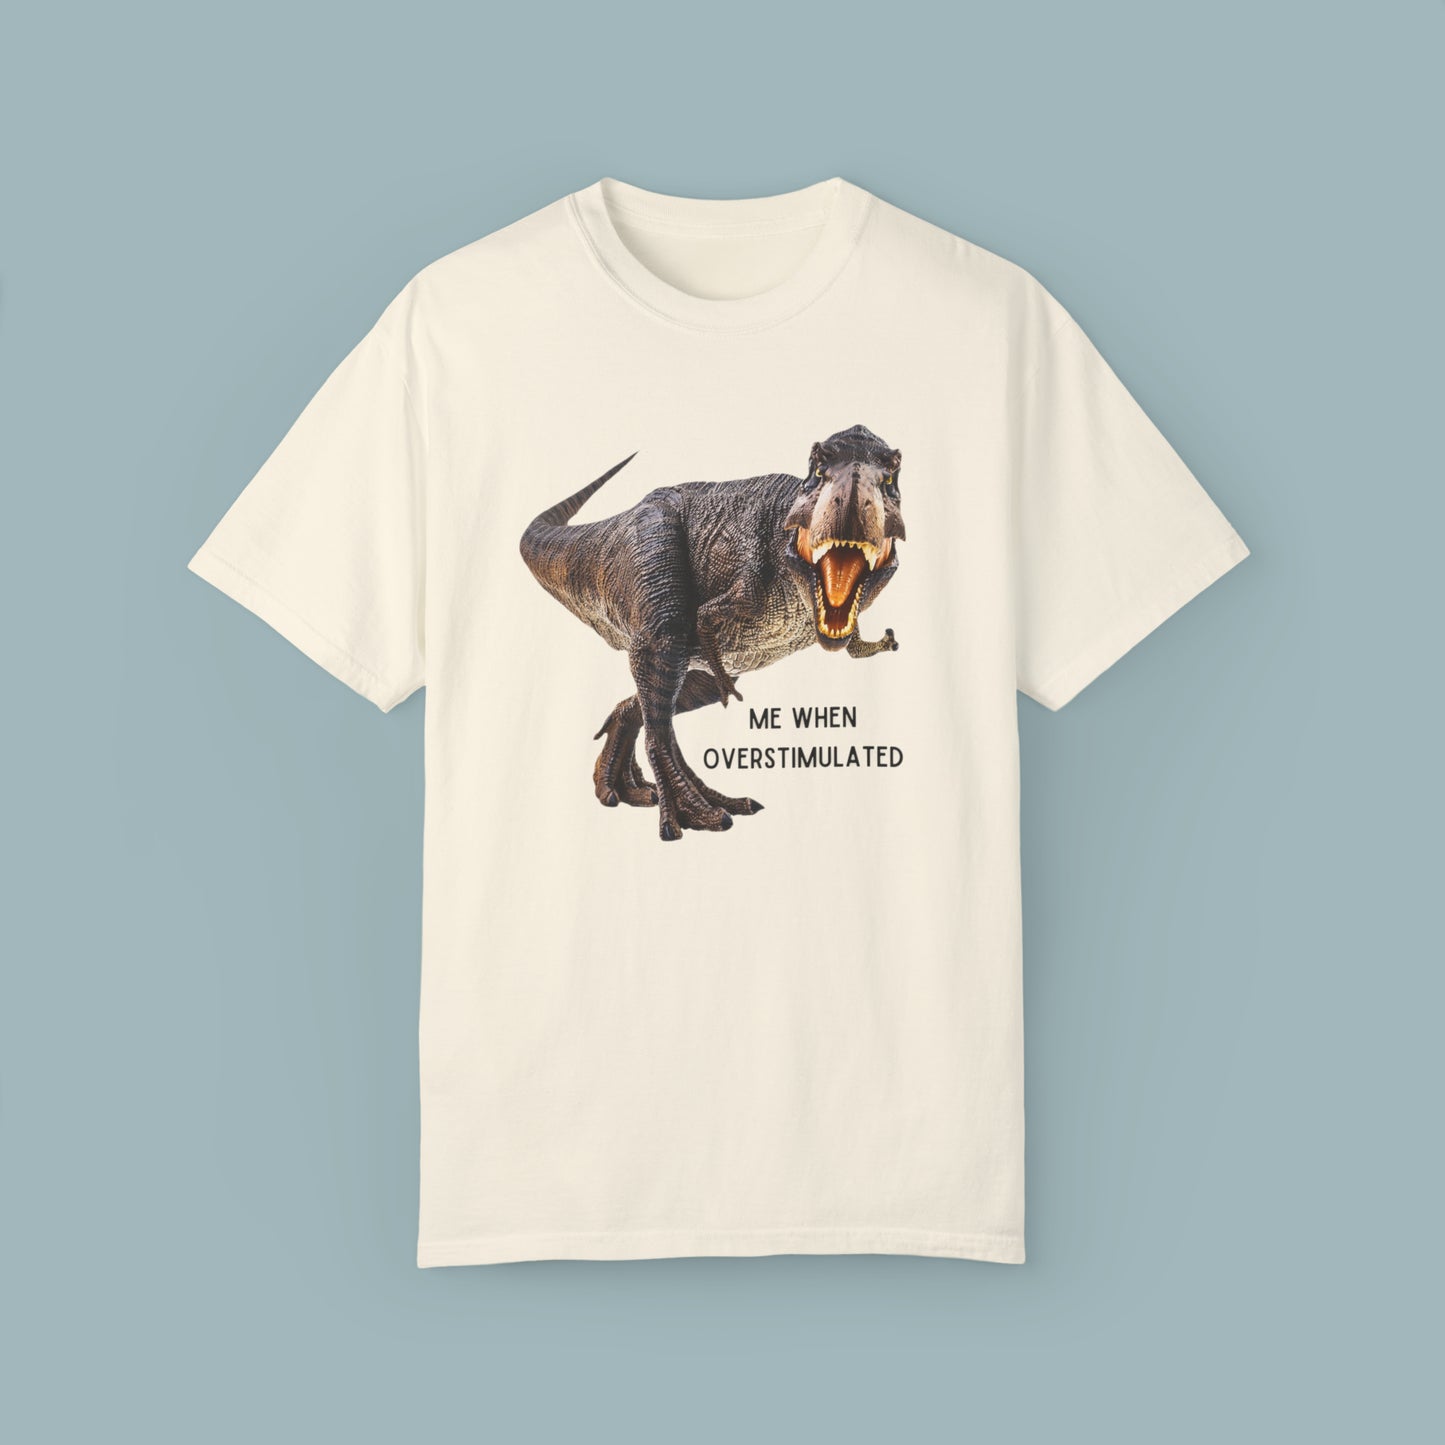 Dinosaur with “ME WHEN OVERSTIMULATED” Unisex Garment-Dyed T-shirt. Just one of the many ways we handle overstimulation.